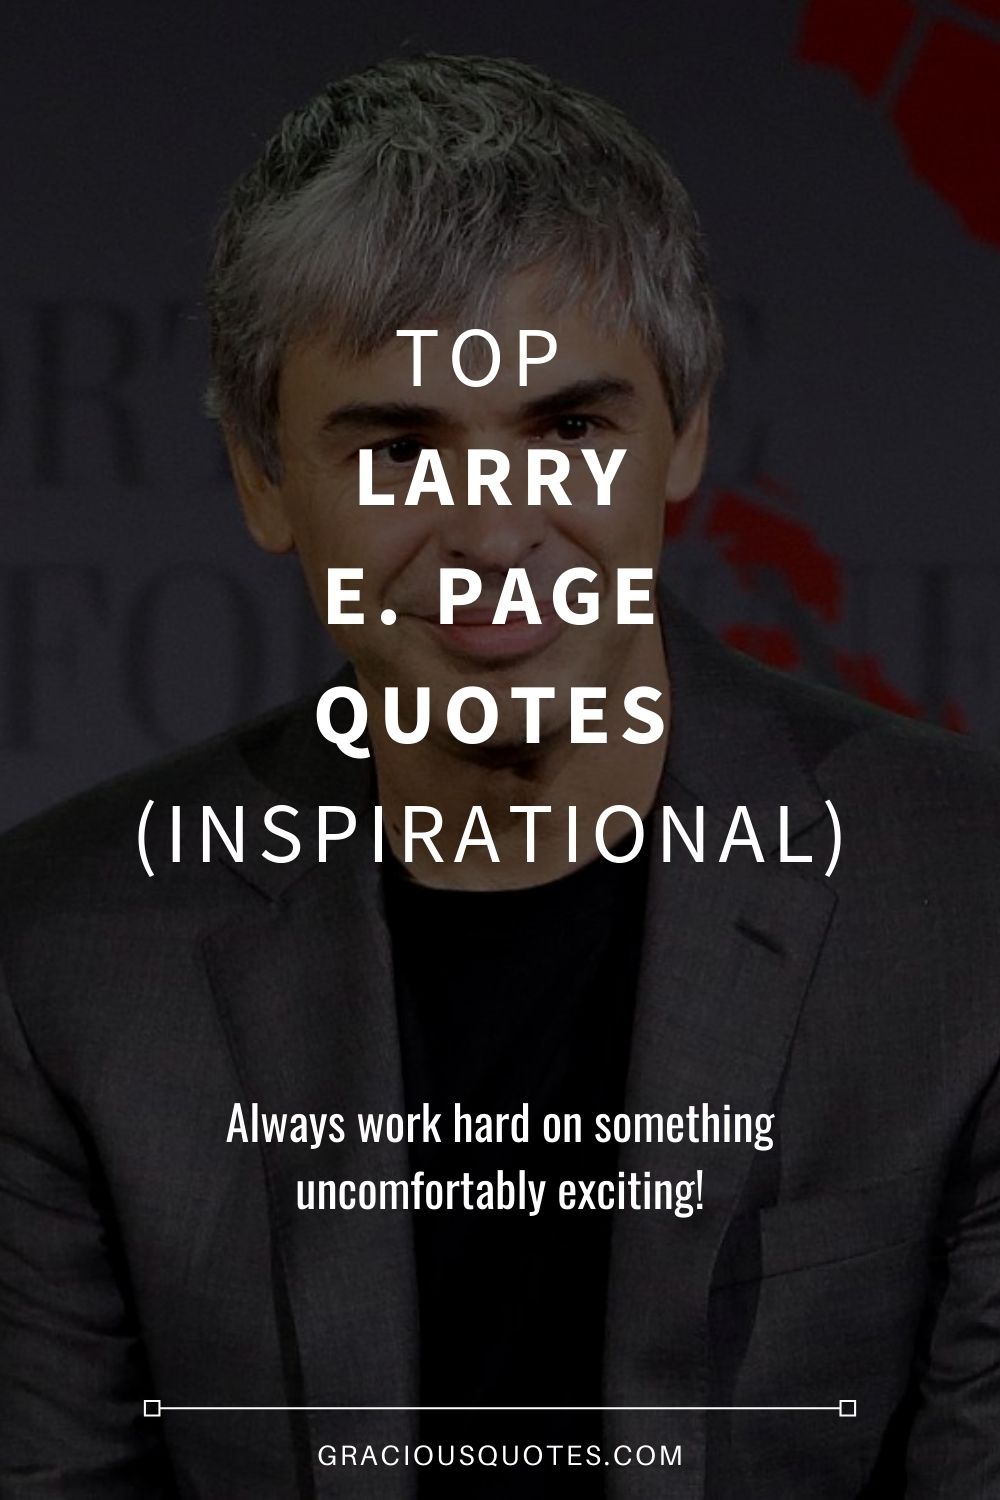 Top Larry E. Page Quotes (INSPIRATIONAL) - Gracious Quotes